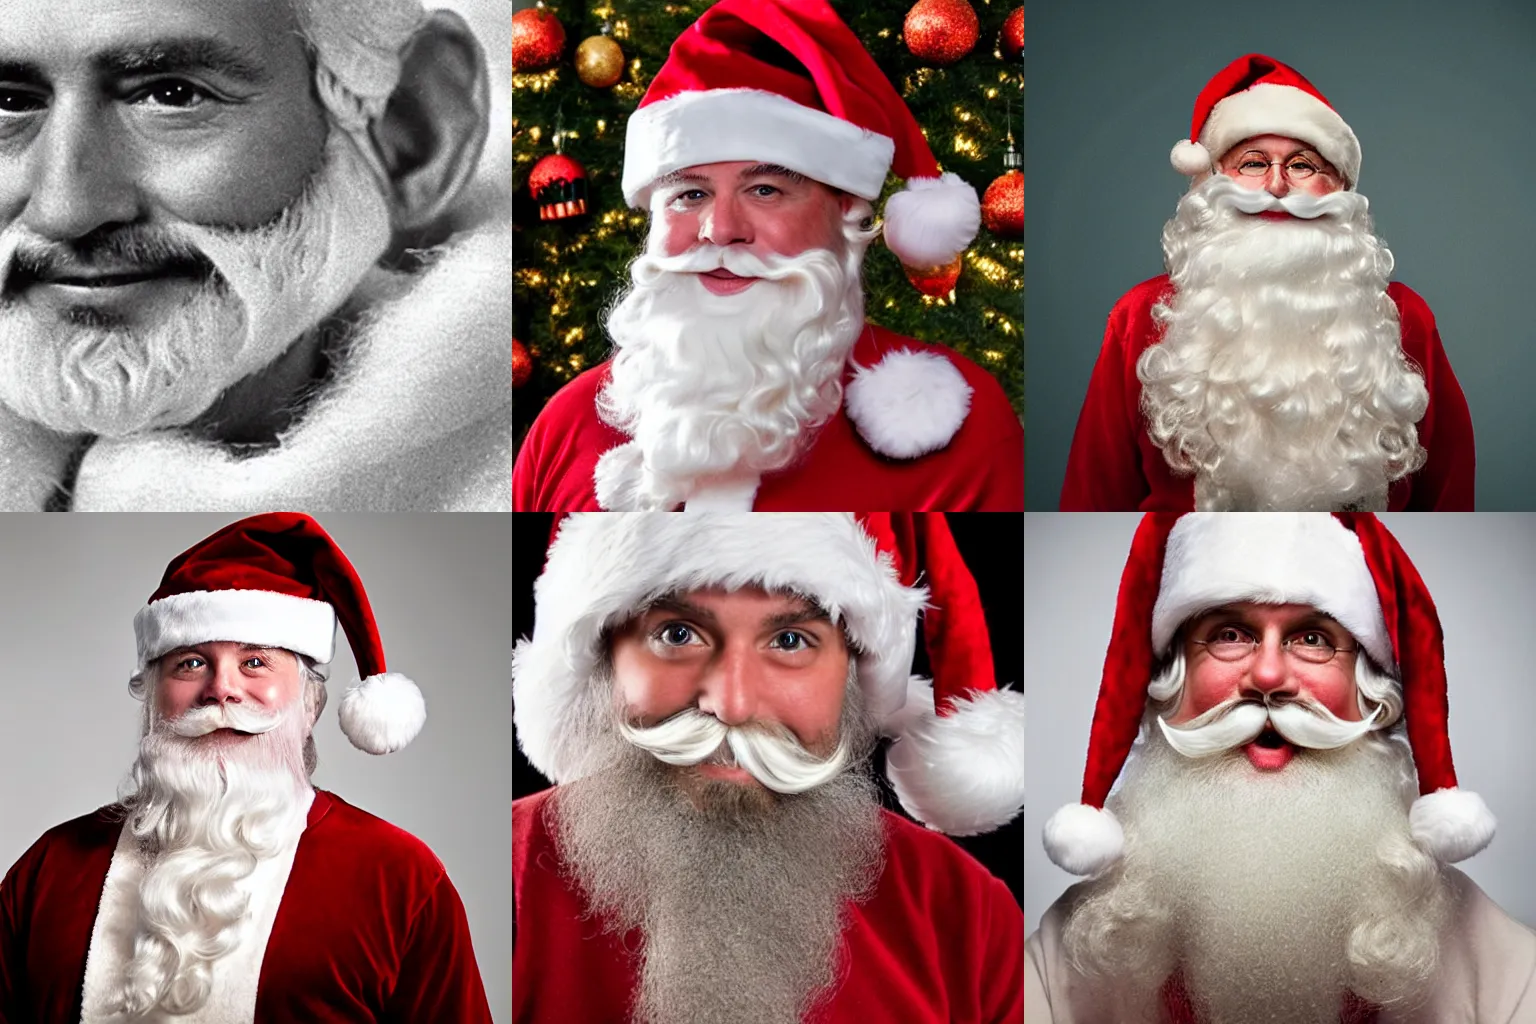 Prompt: A clean-shaven Santa Claus without any facial hair